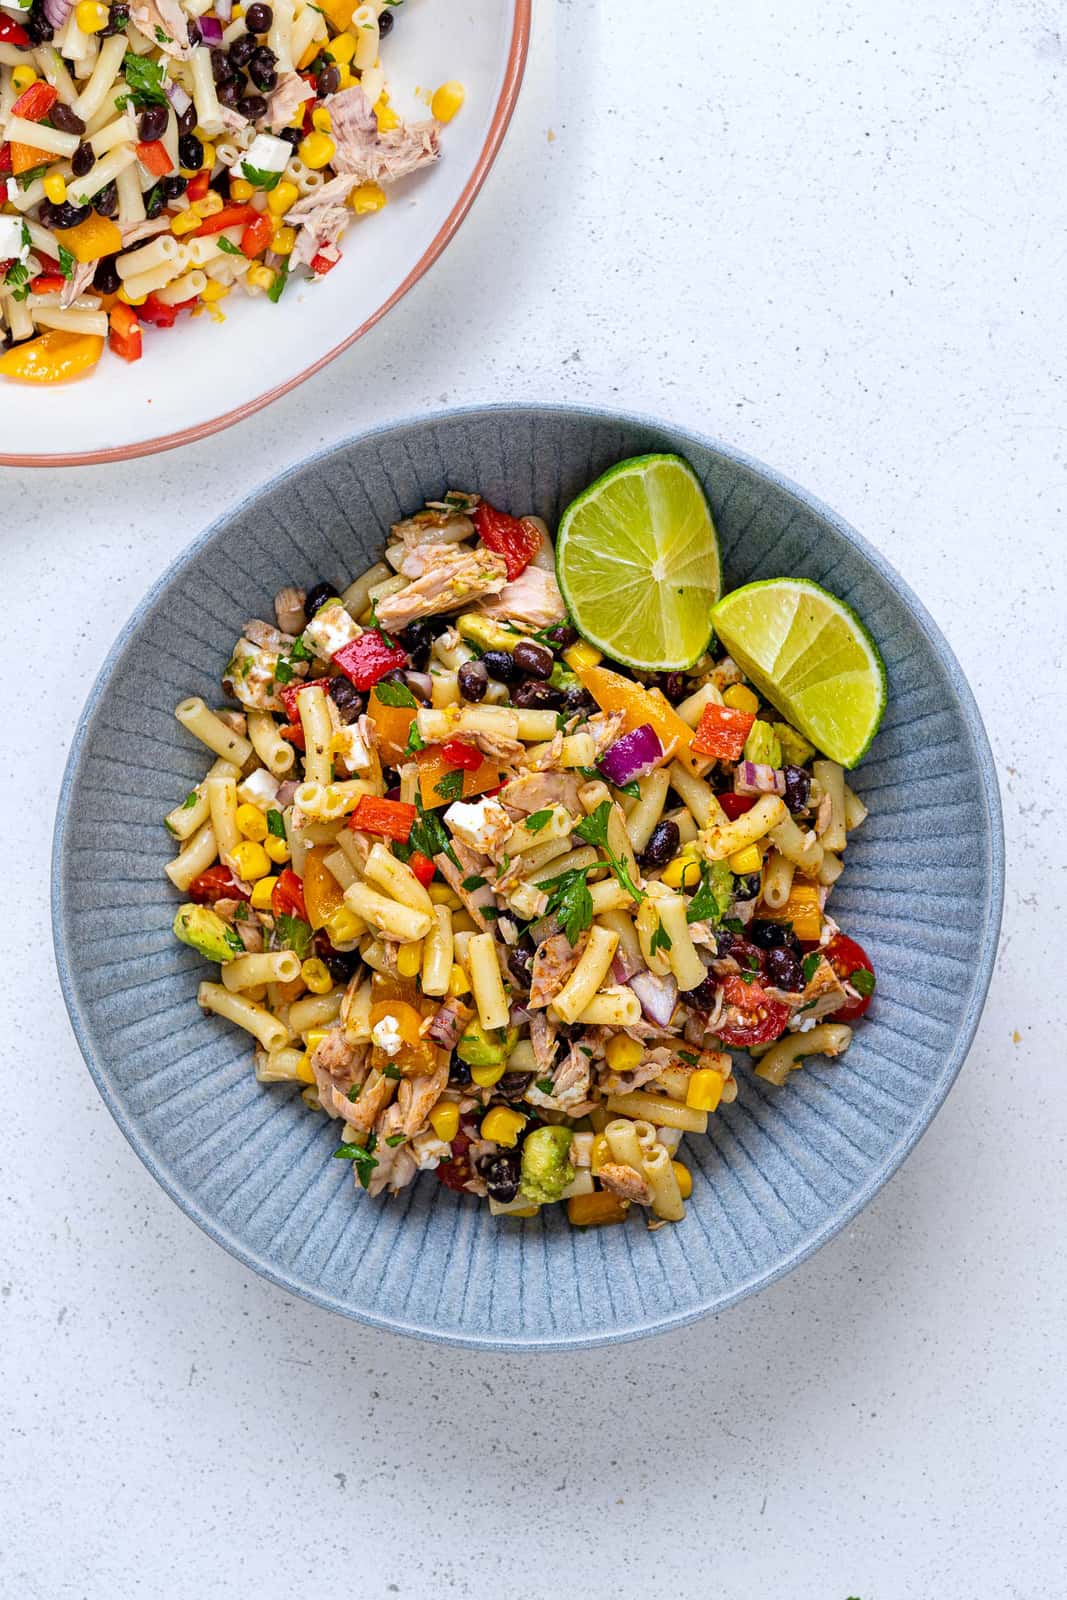 Healthy Tuna pasta salad in a grey bowl with limes on the side